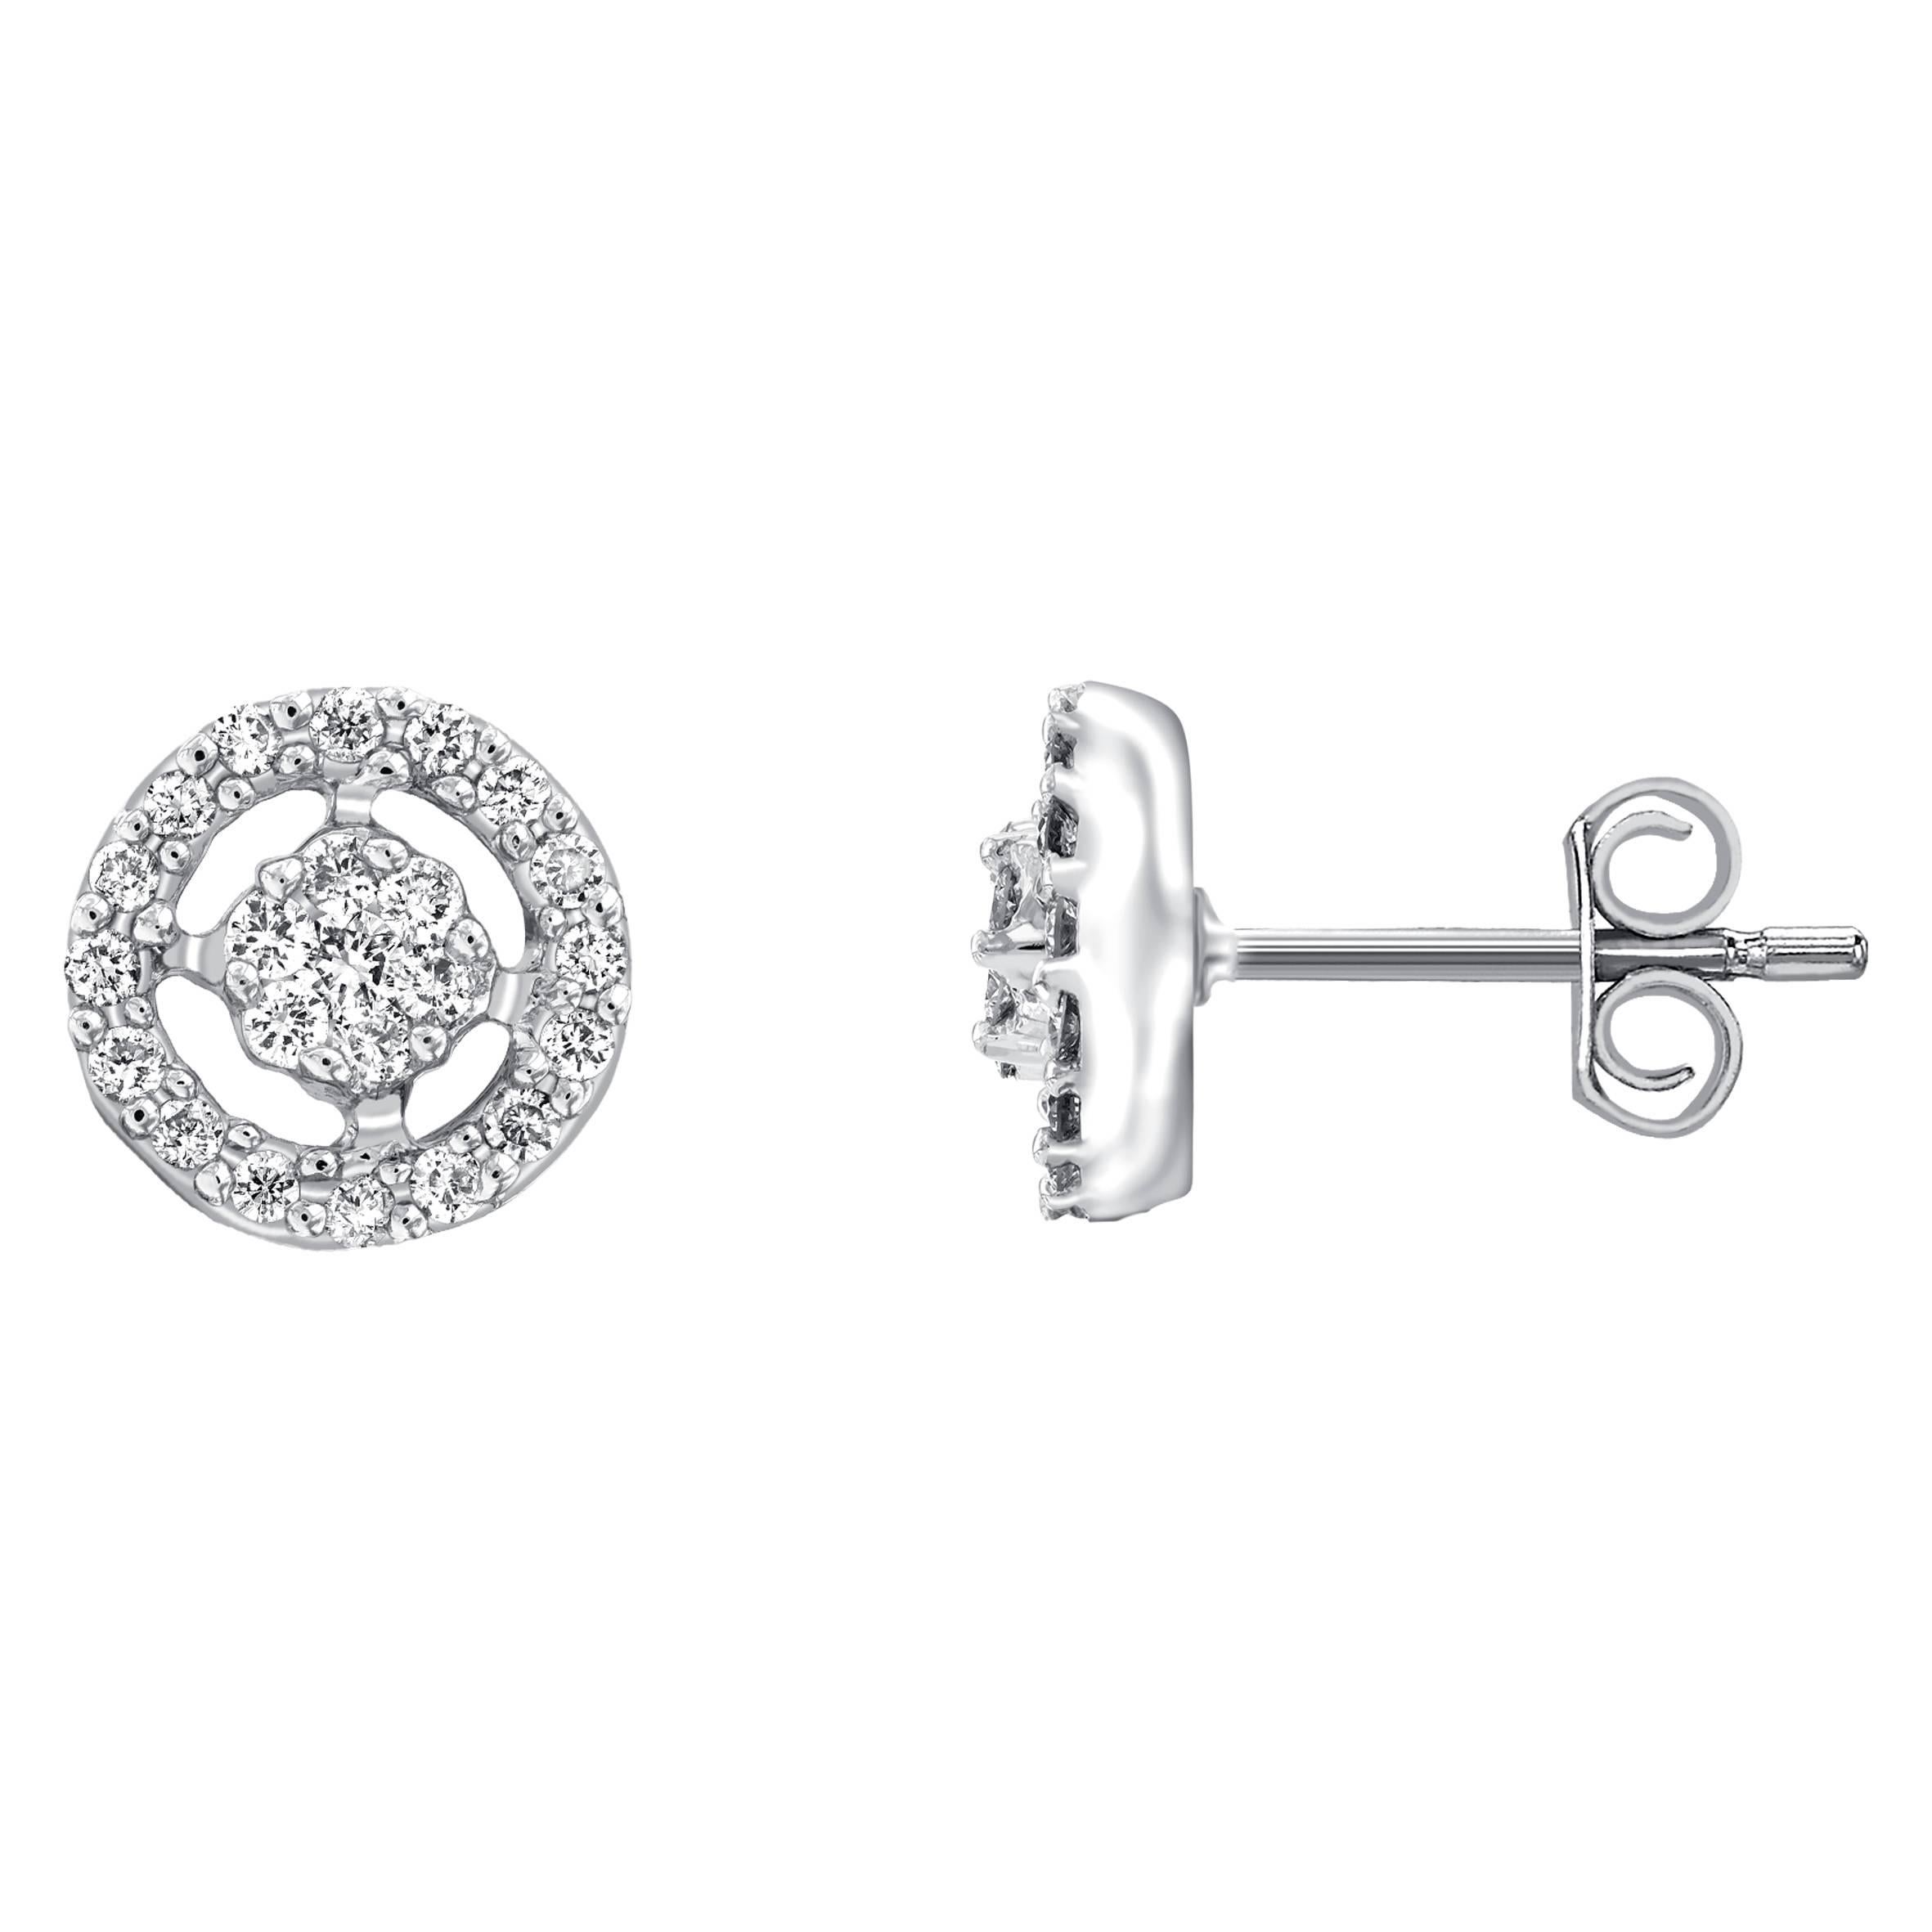 0.50 Carat Round Diamond 18KT White Gold Exquisite Cluster Stud Earrings 